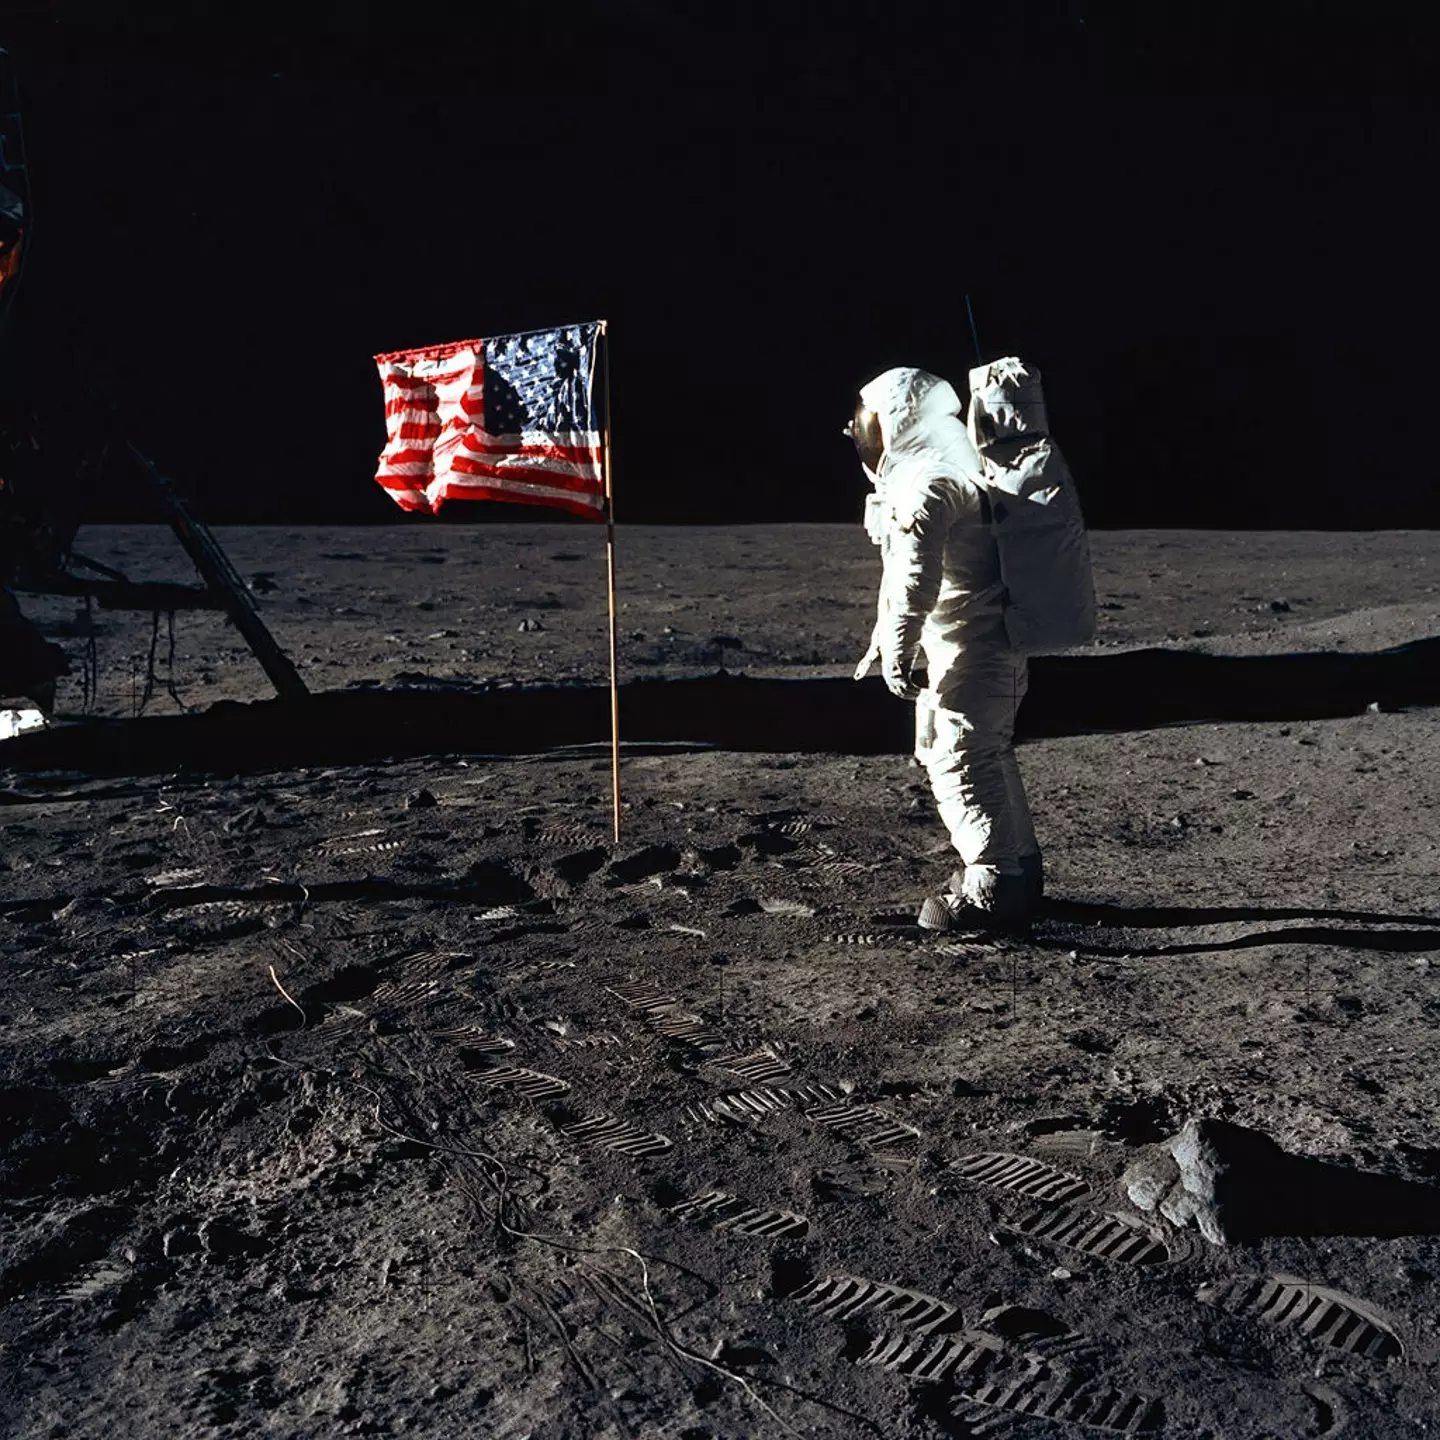 Some theorists think the Apollo 11 mission was fake.